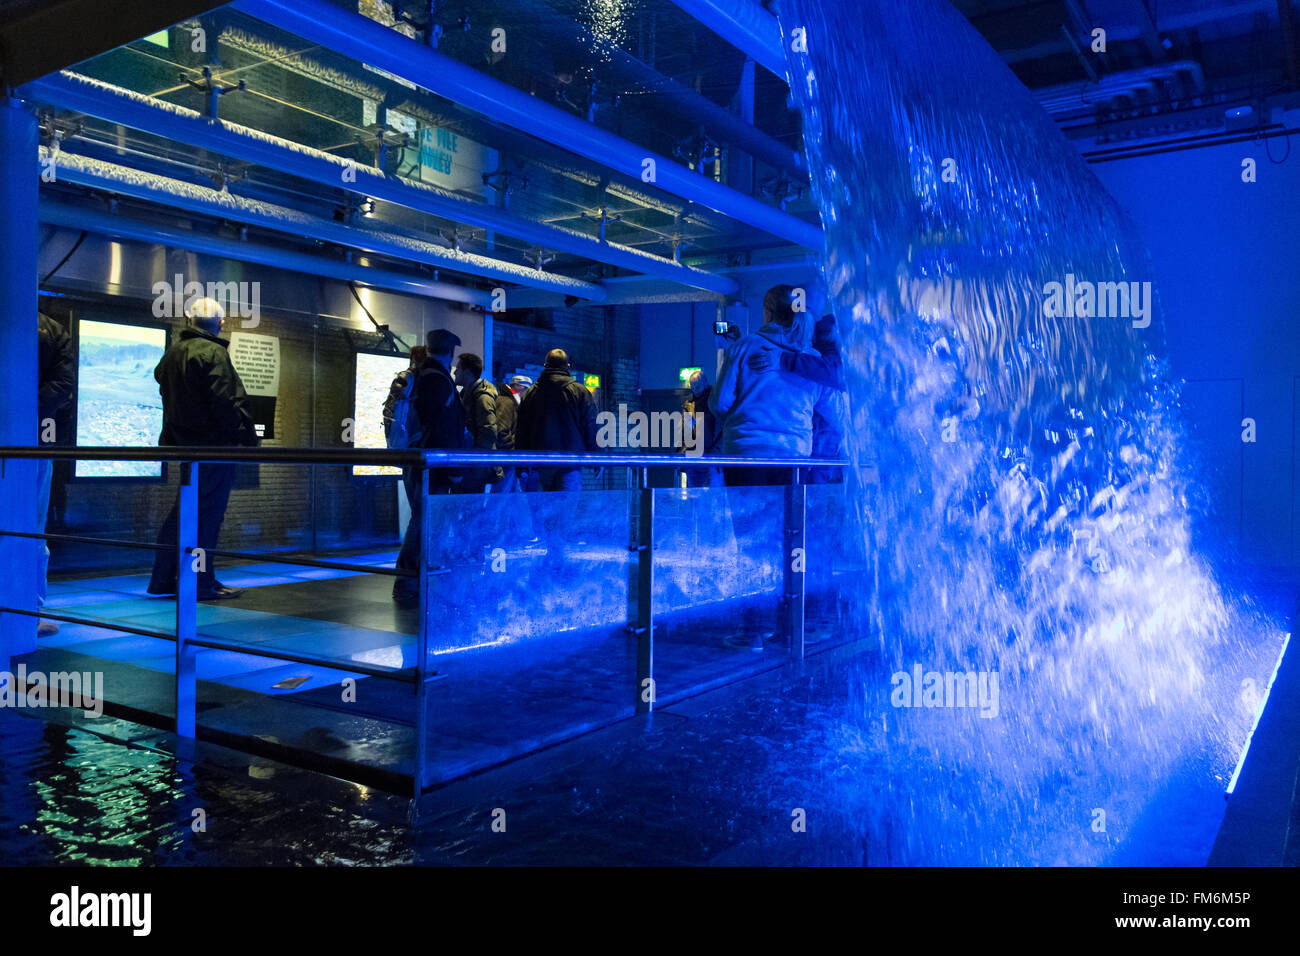 water display inside the Guinness Storehouse brewery exhibition, Dublin, Ireland Stock Photo